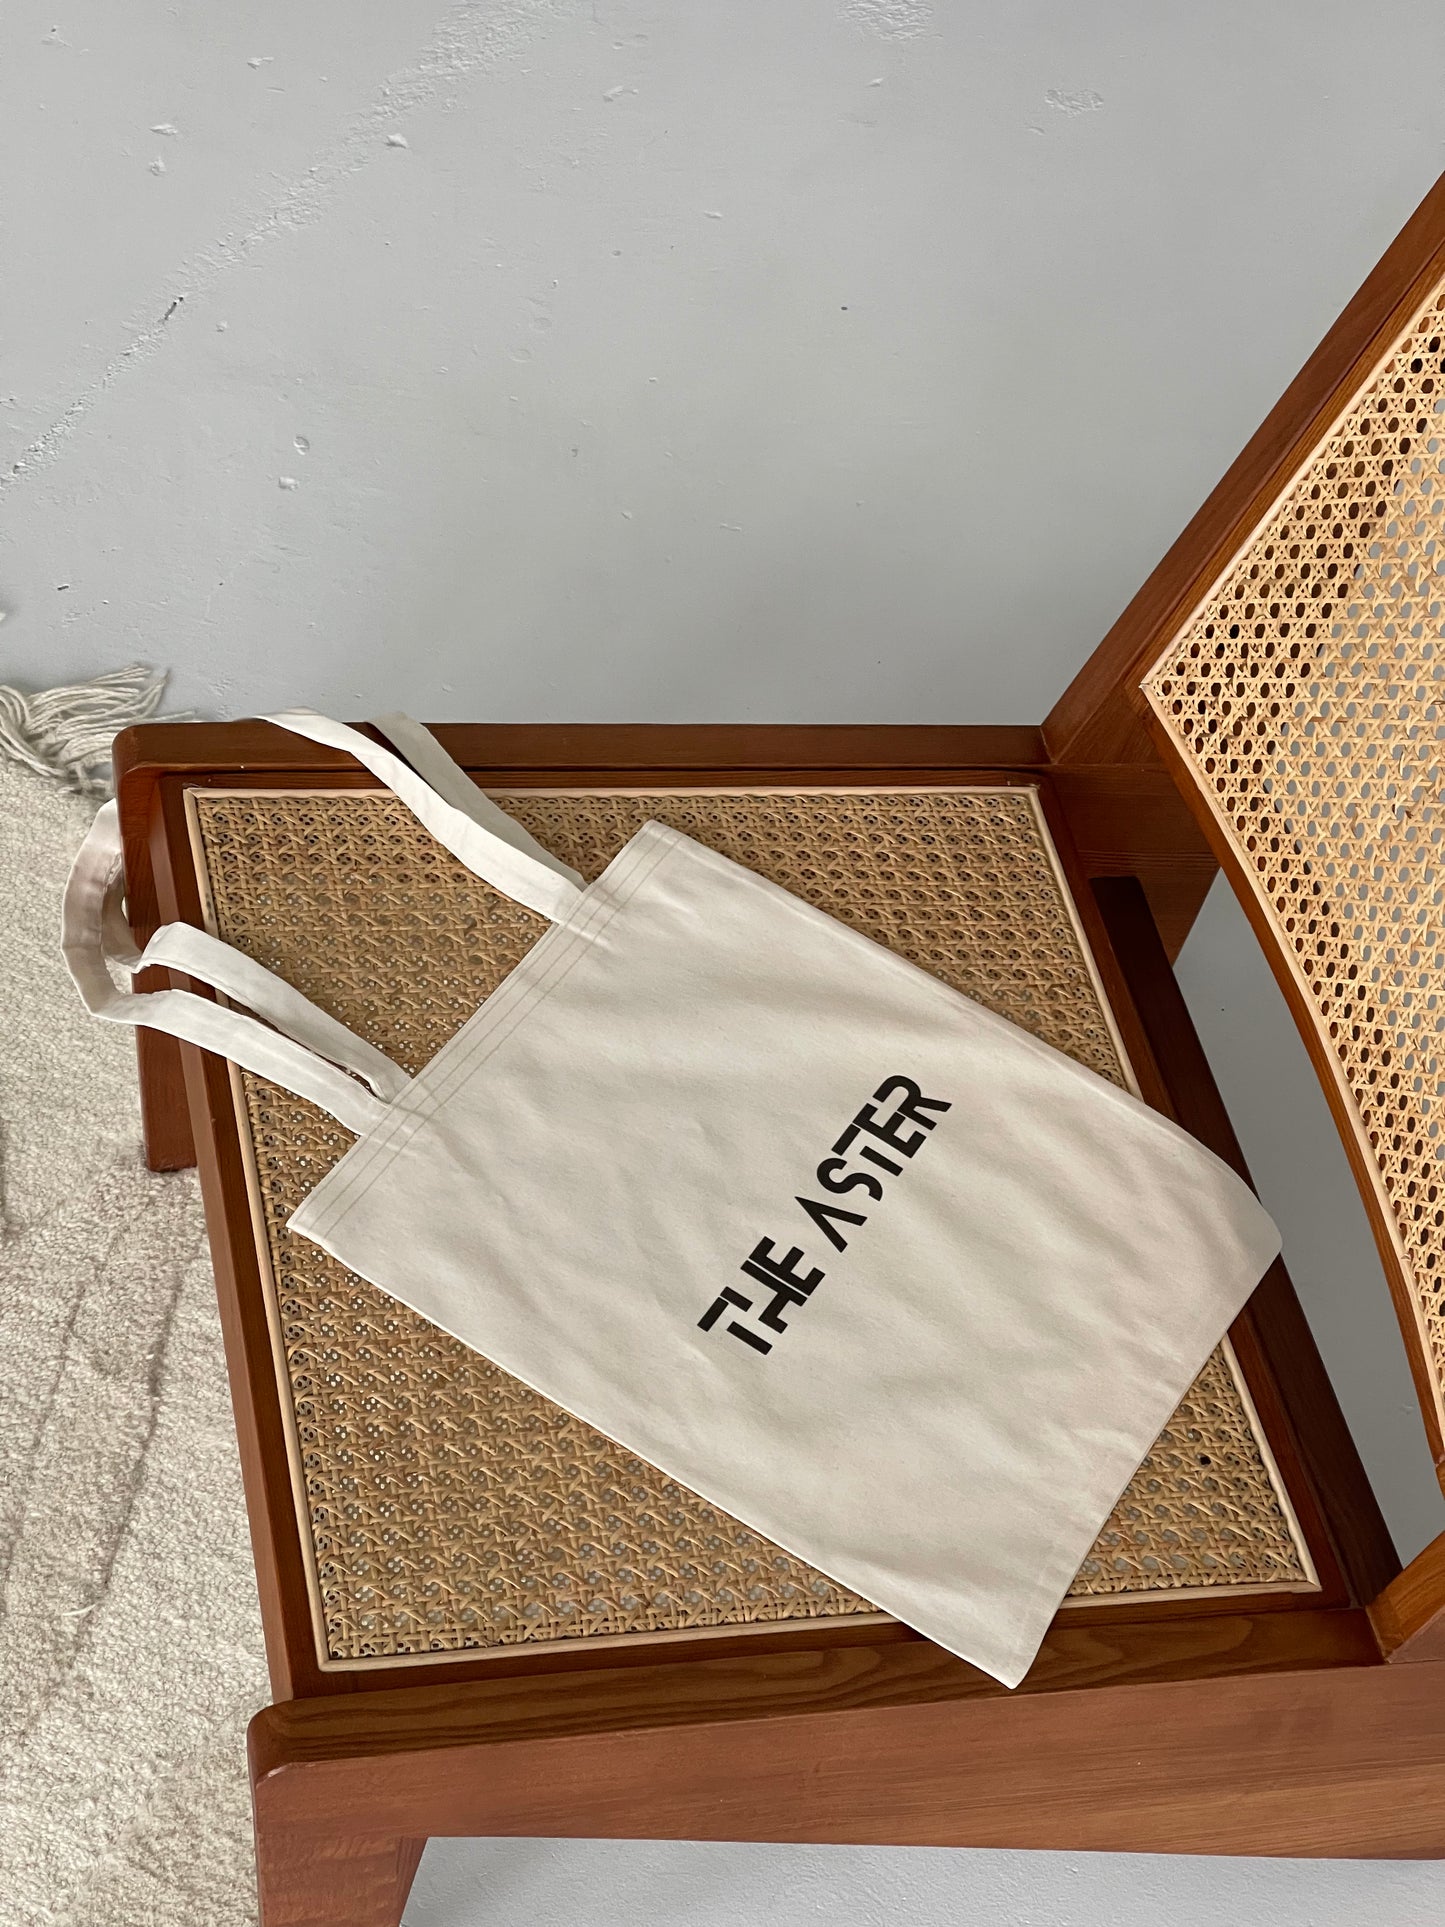 Tote bag "Cafe terrace at night"